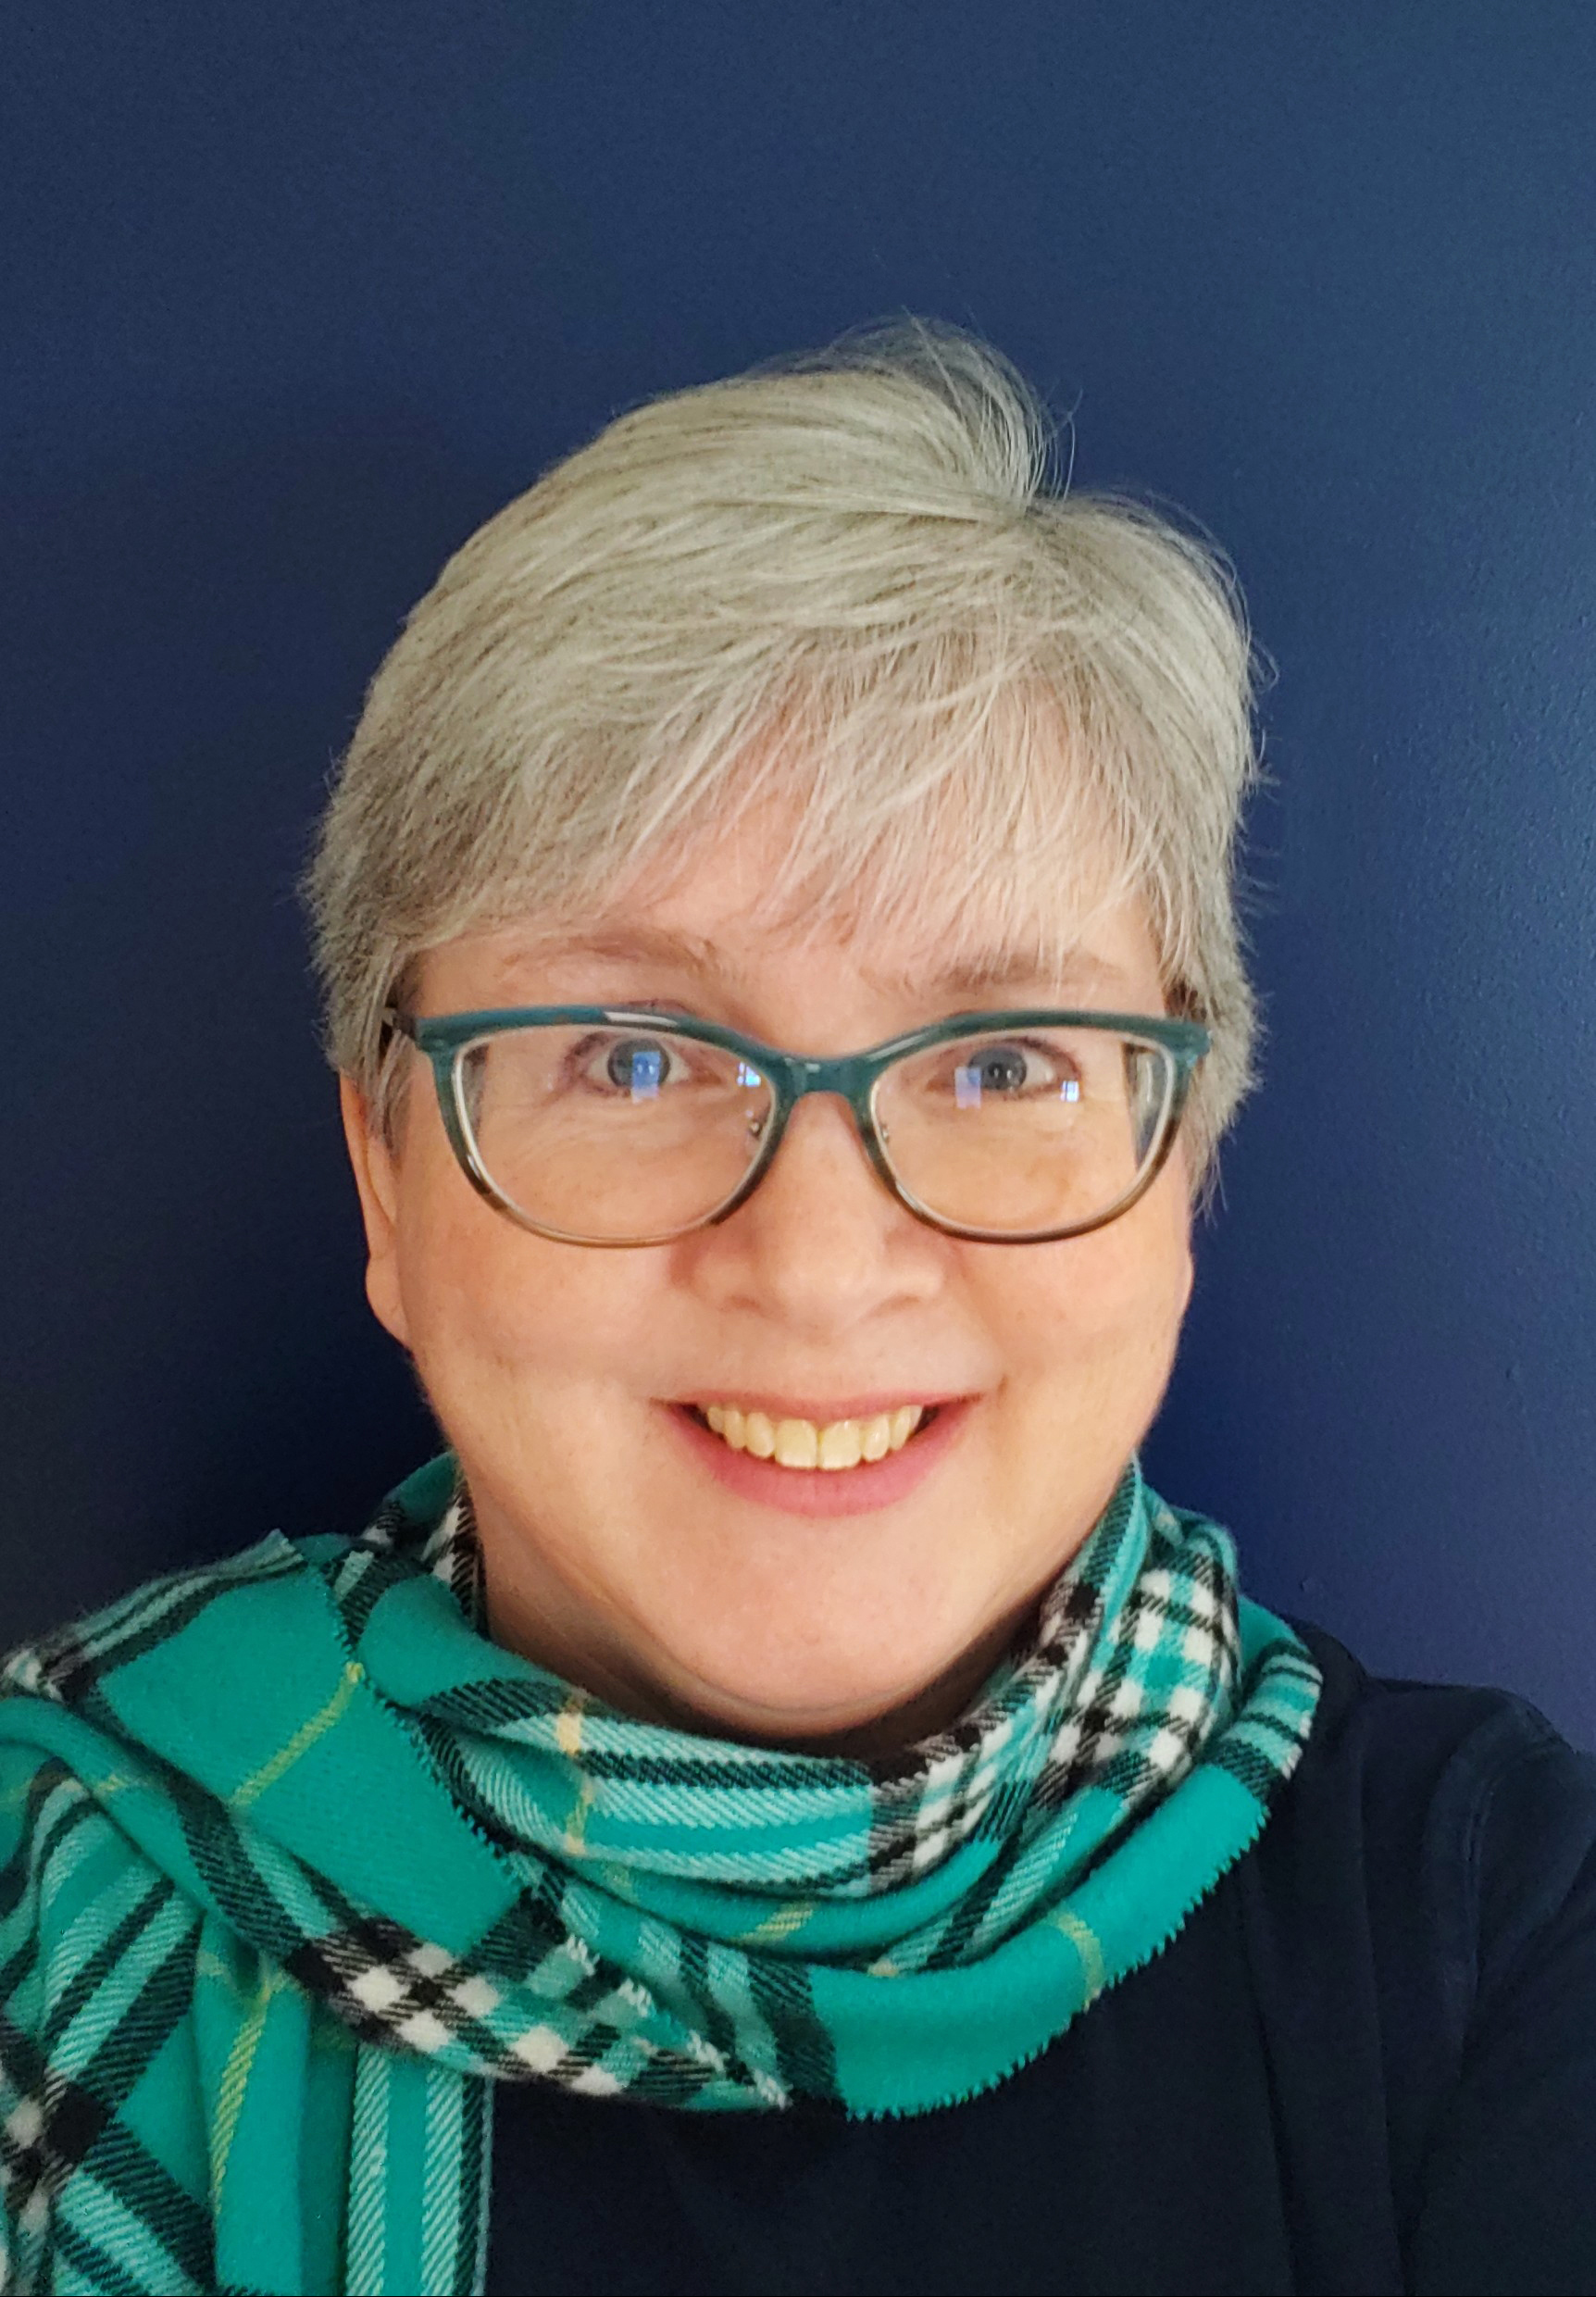 Smiling woman with short gray hair, a turquoise plaid scarf and turquoise framed glasses.